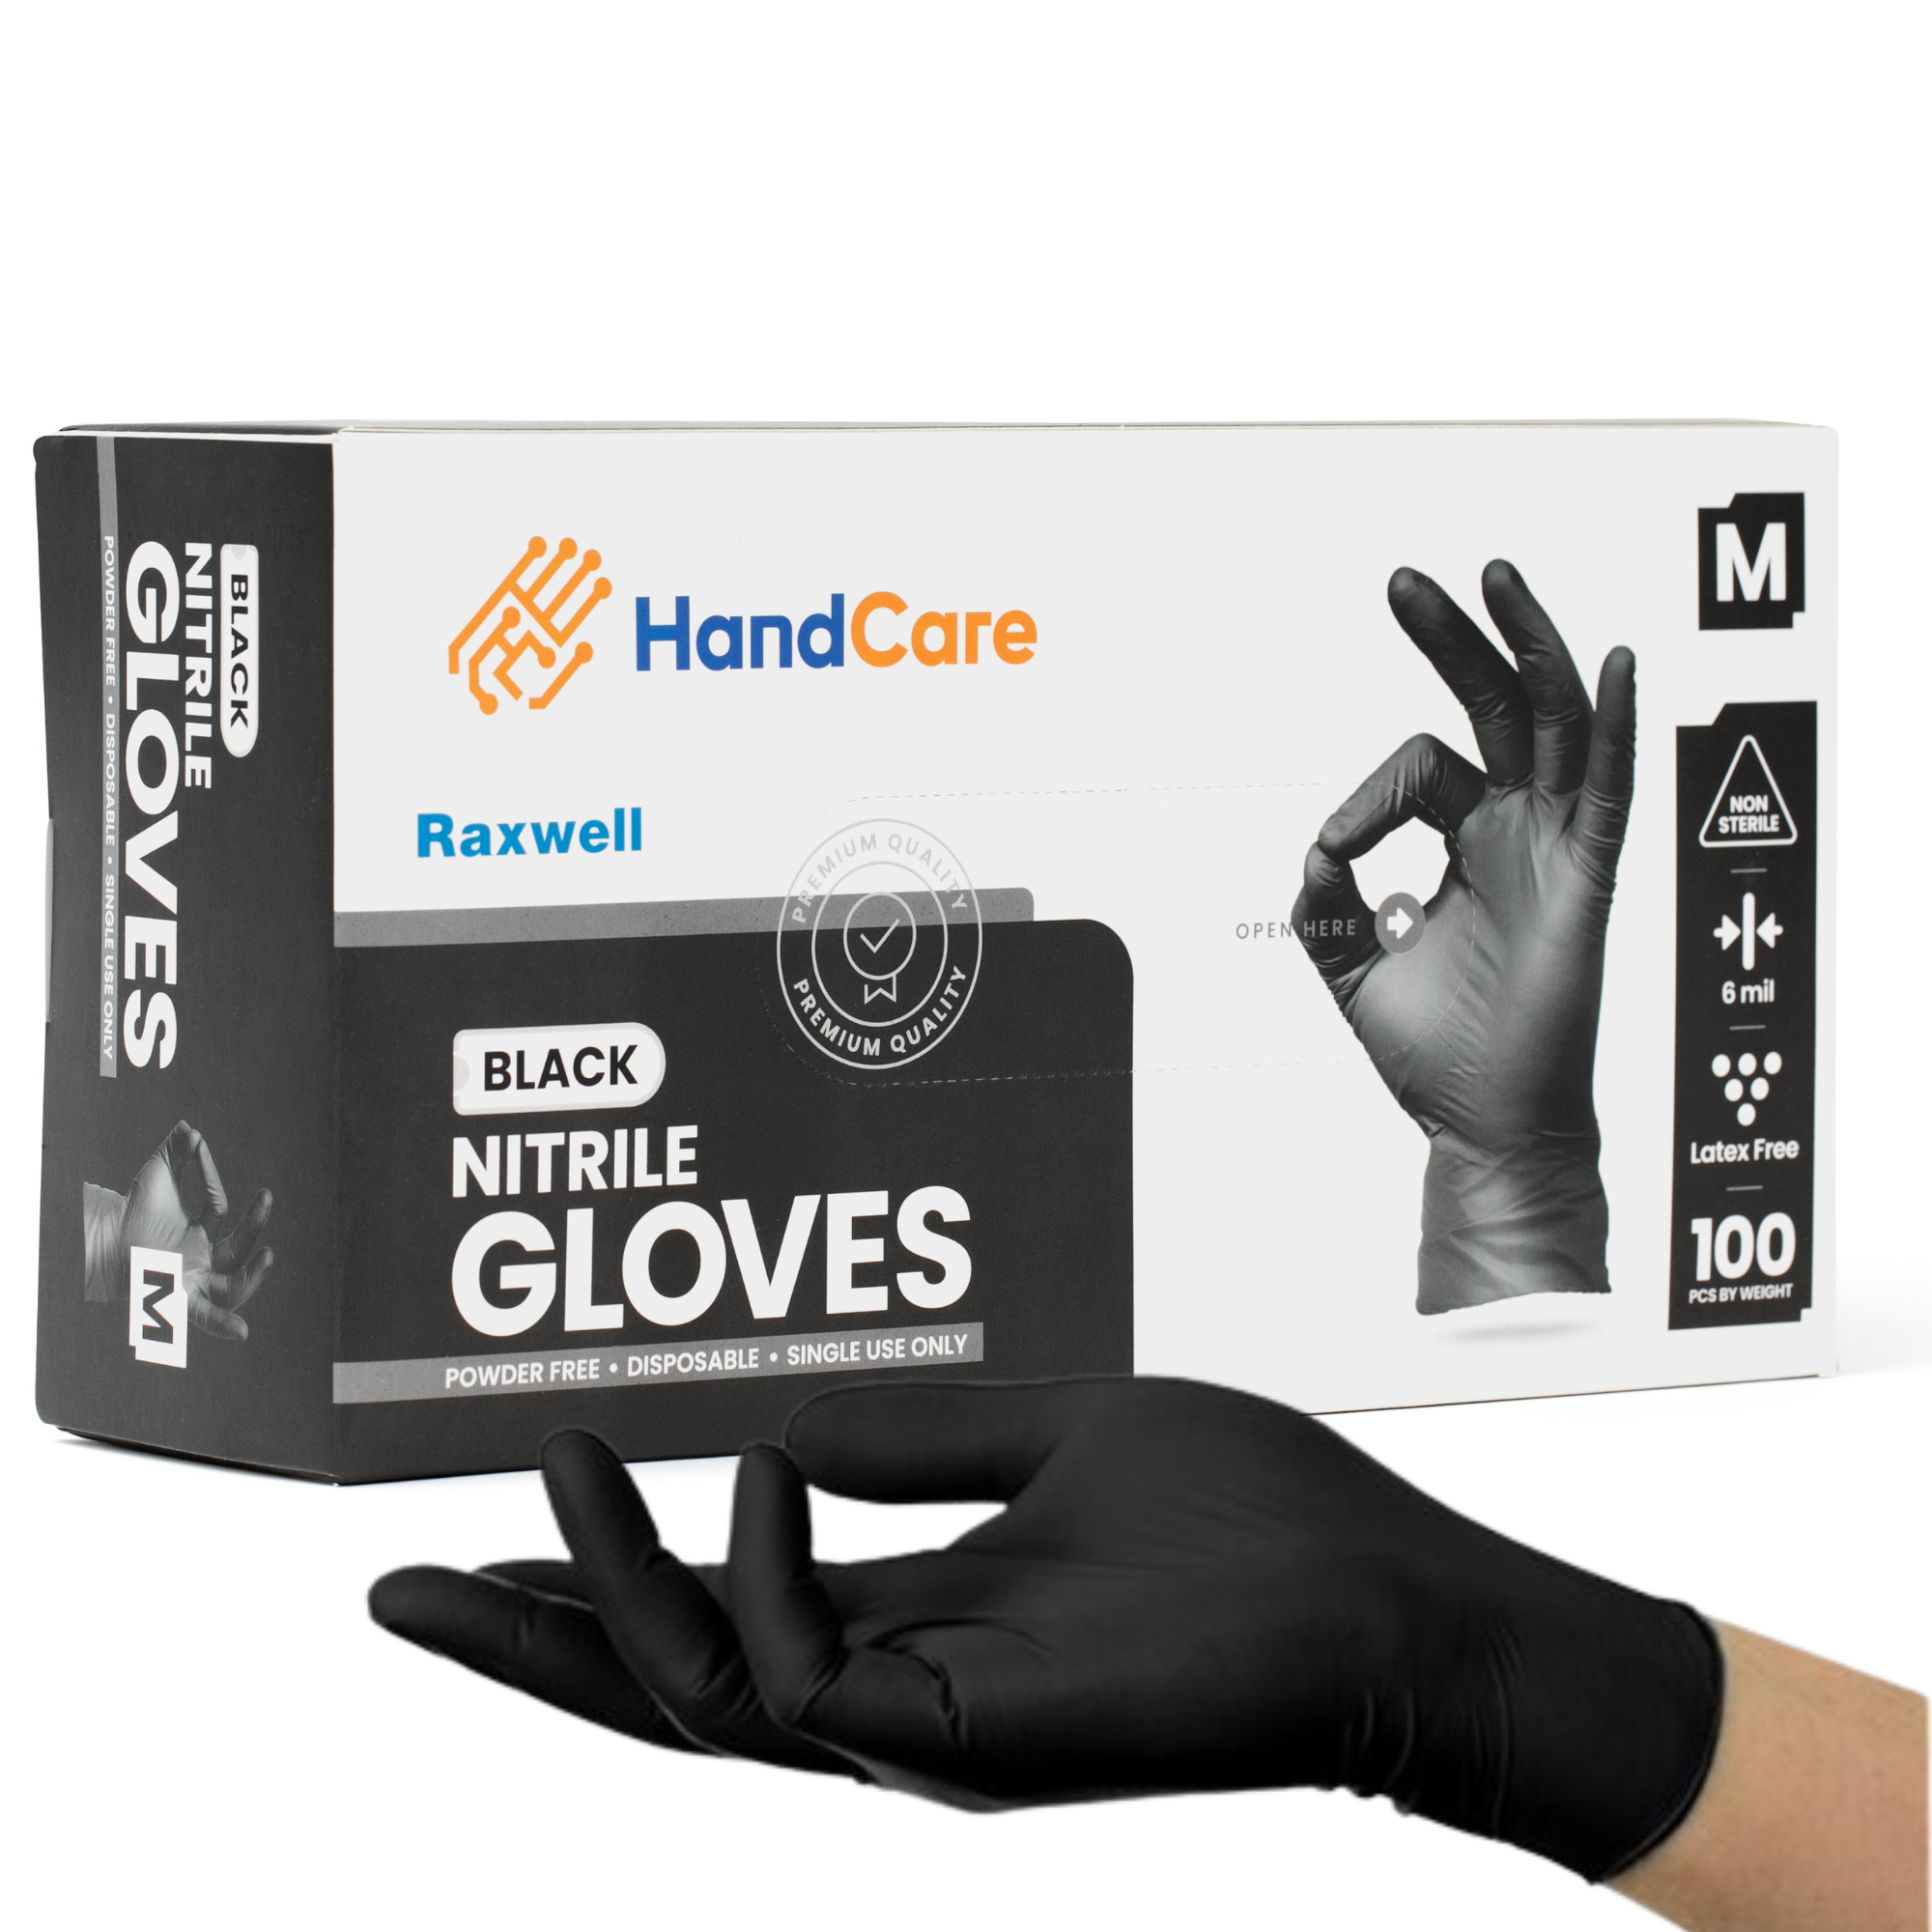 Buy Cheap Nitrile Gloves Online  Powder-Free & Chemical Resistant